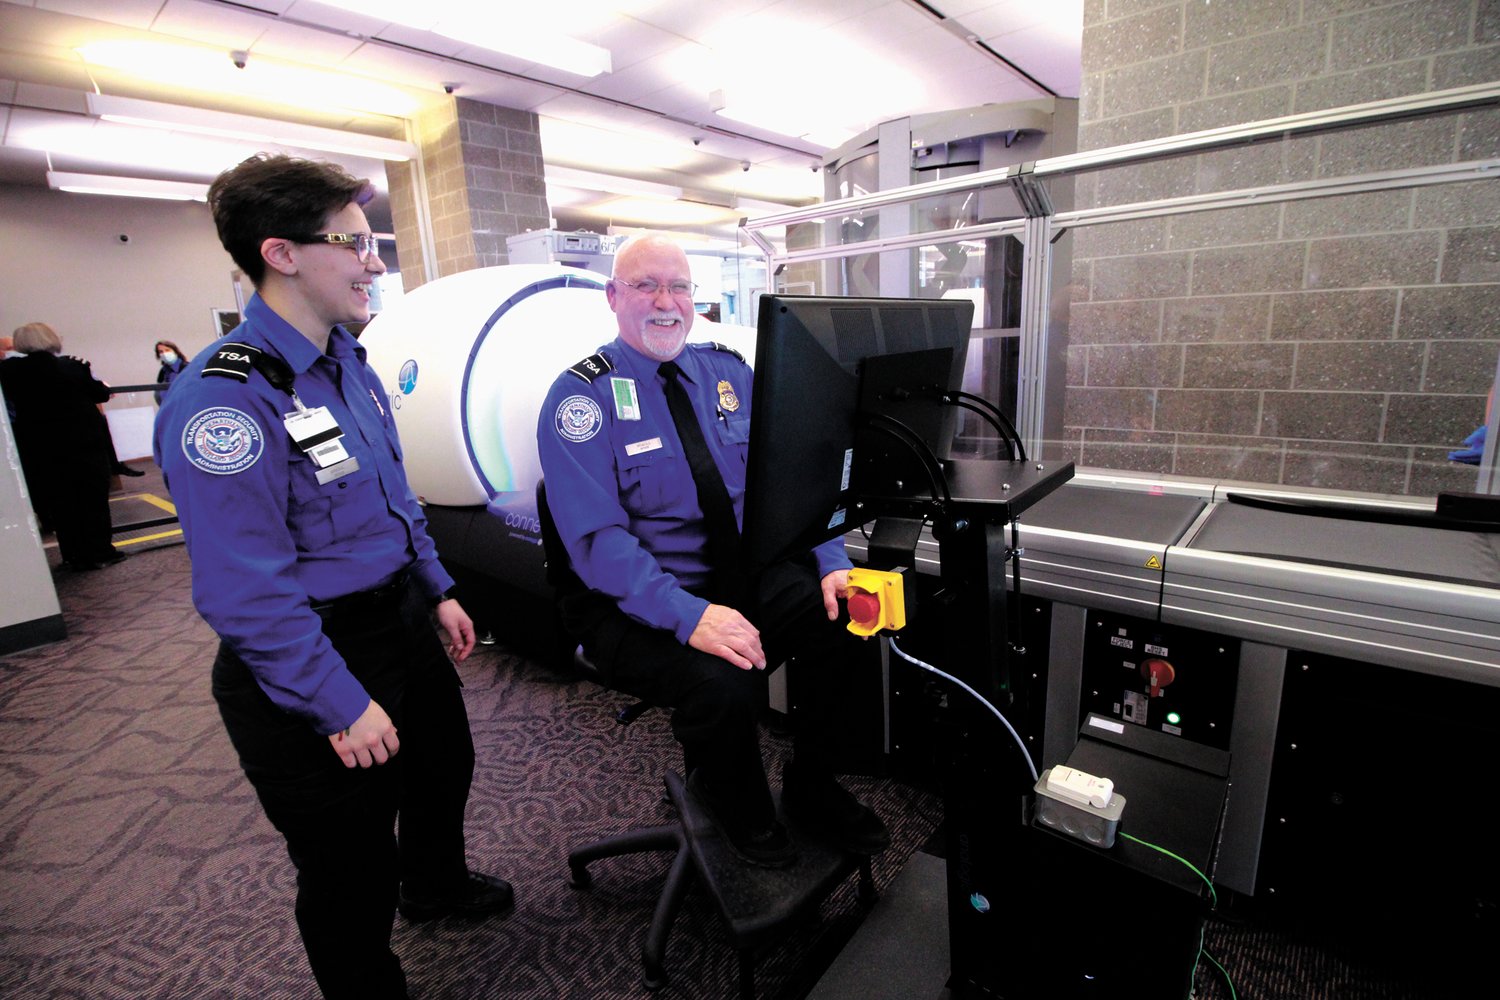 MAKING SECURITY CLEARANCE EASIER: Transportation Security Officers train on one of the new Computed Tomography (CT) systems at Green Airport. The scanners provide a 3D view of carry-on bag contents eliminating the need to individually scan or individually examine some items including laptops. (Warwick Beacon photo)